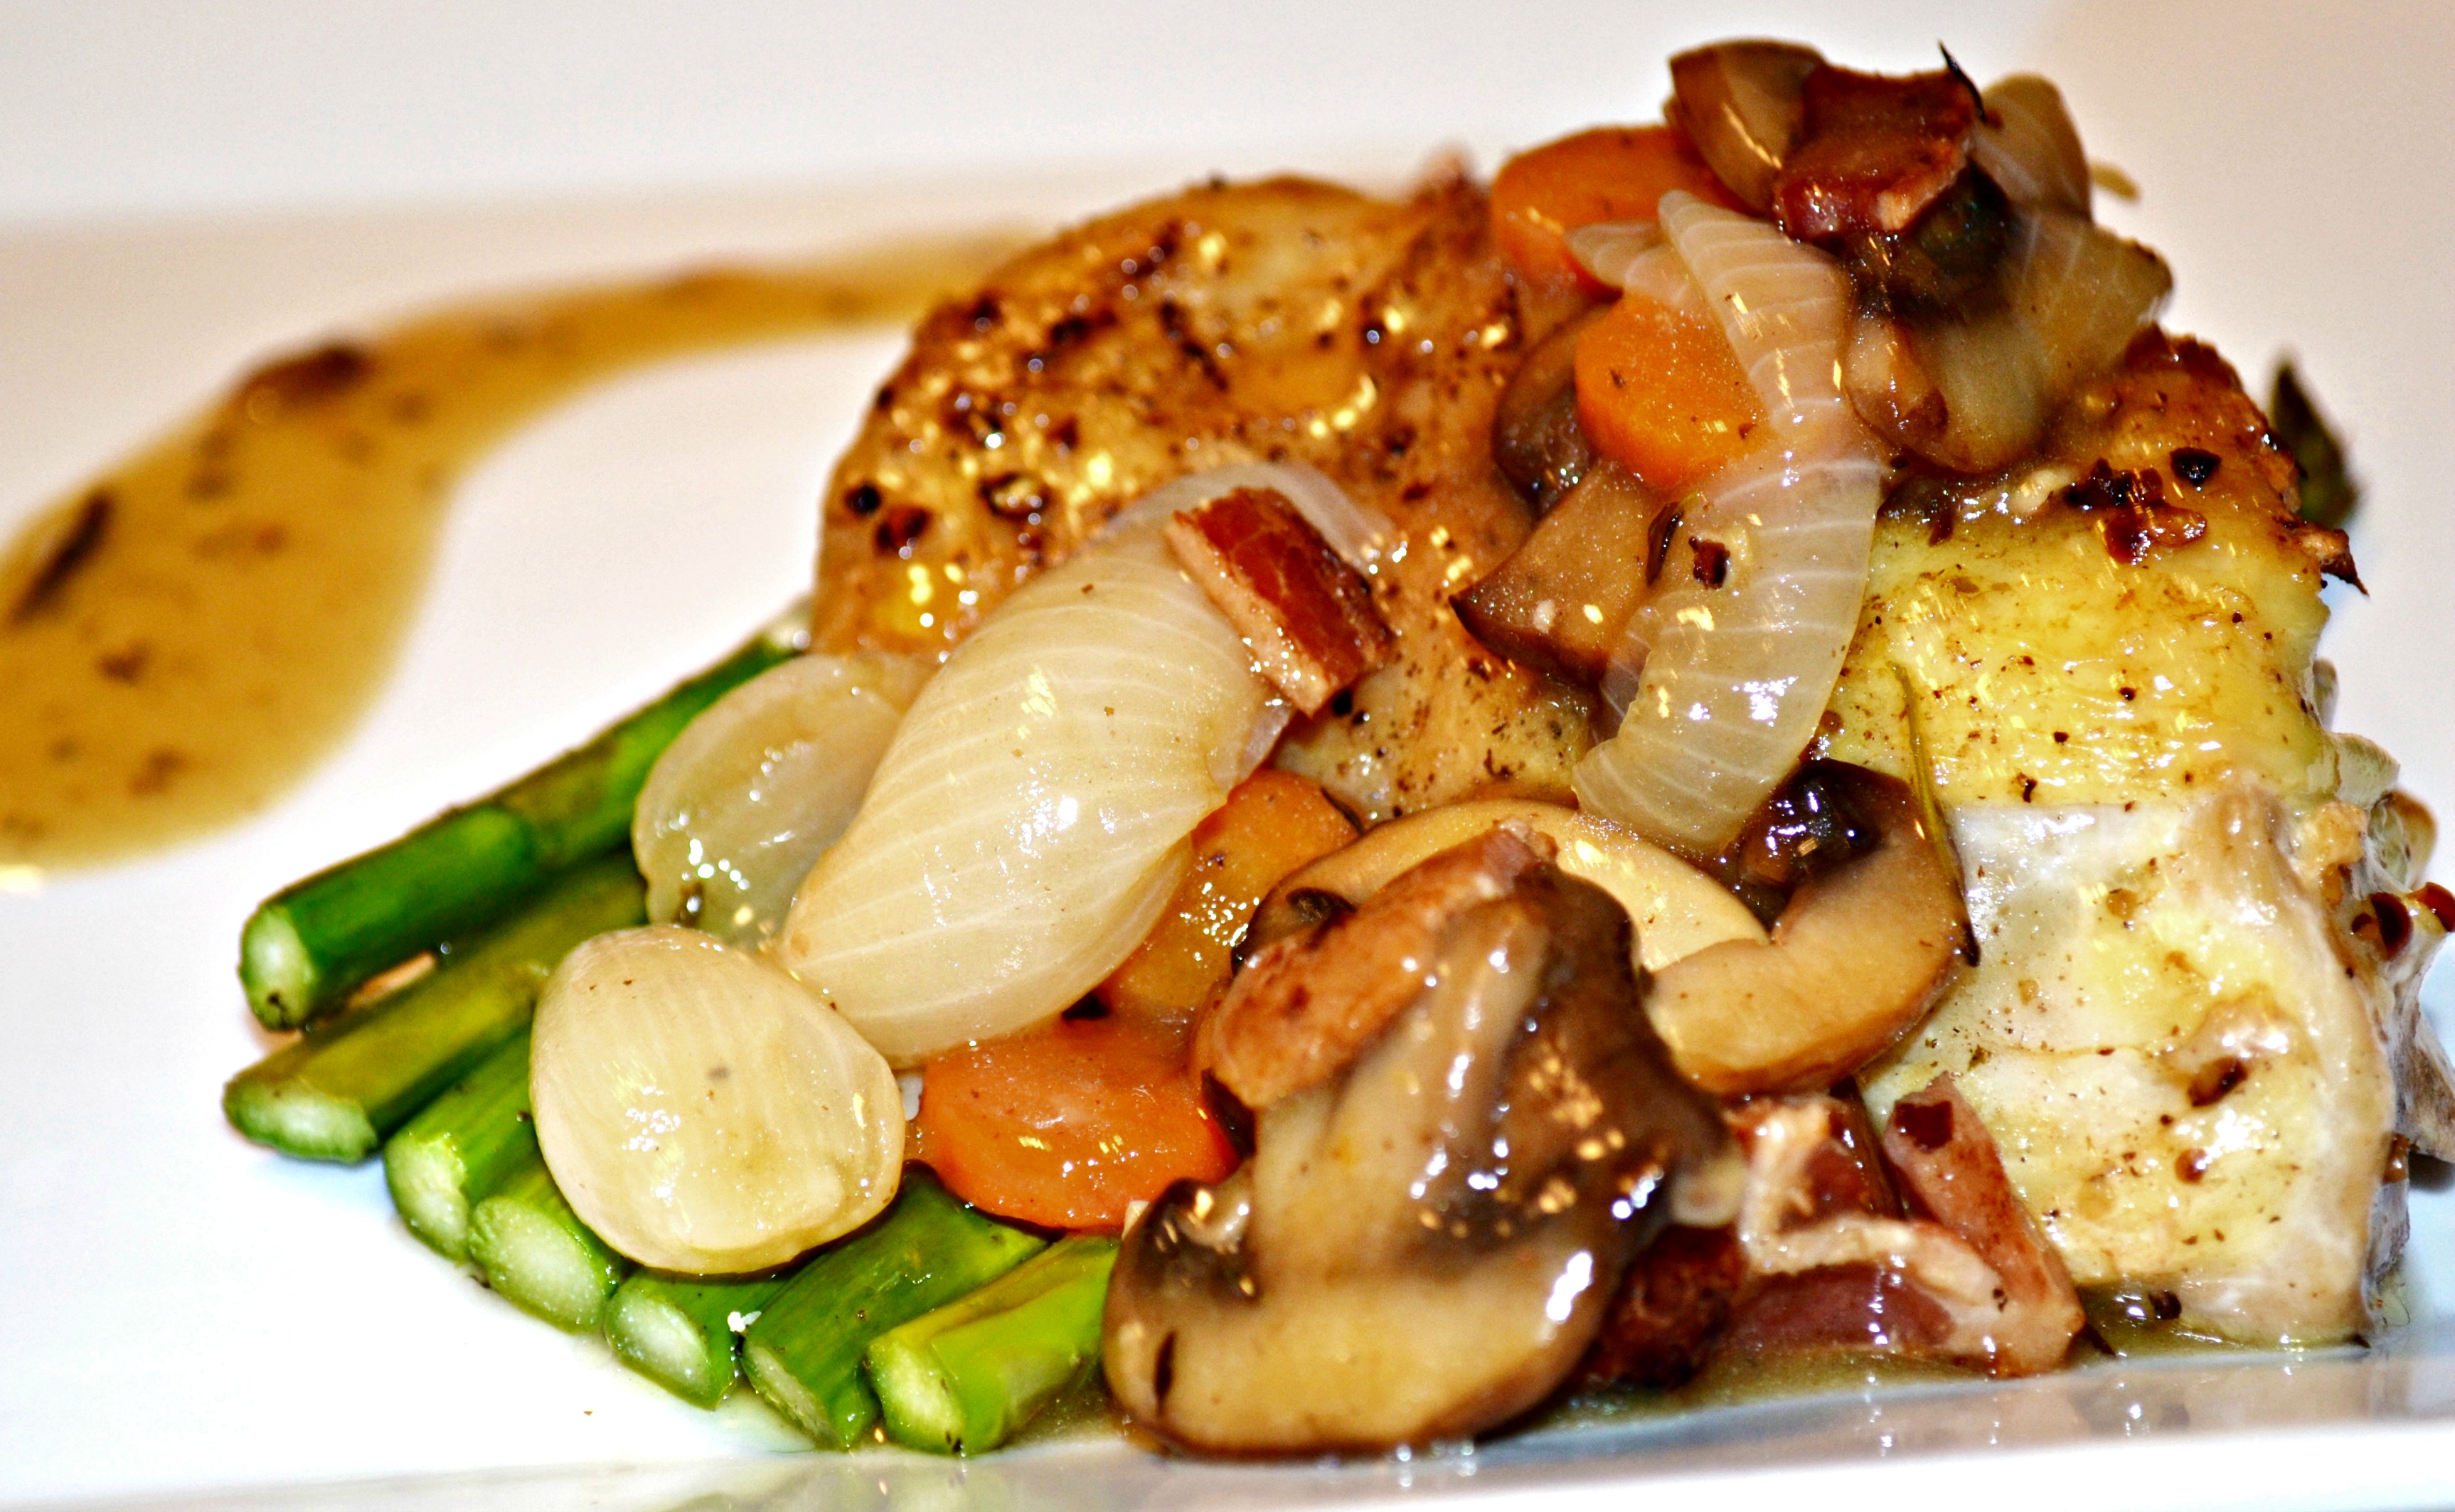 Braised Chicken Thighs with White Wine, Cipolline Onions and Mushrooms